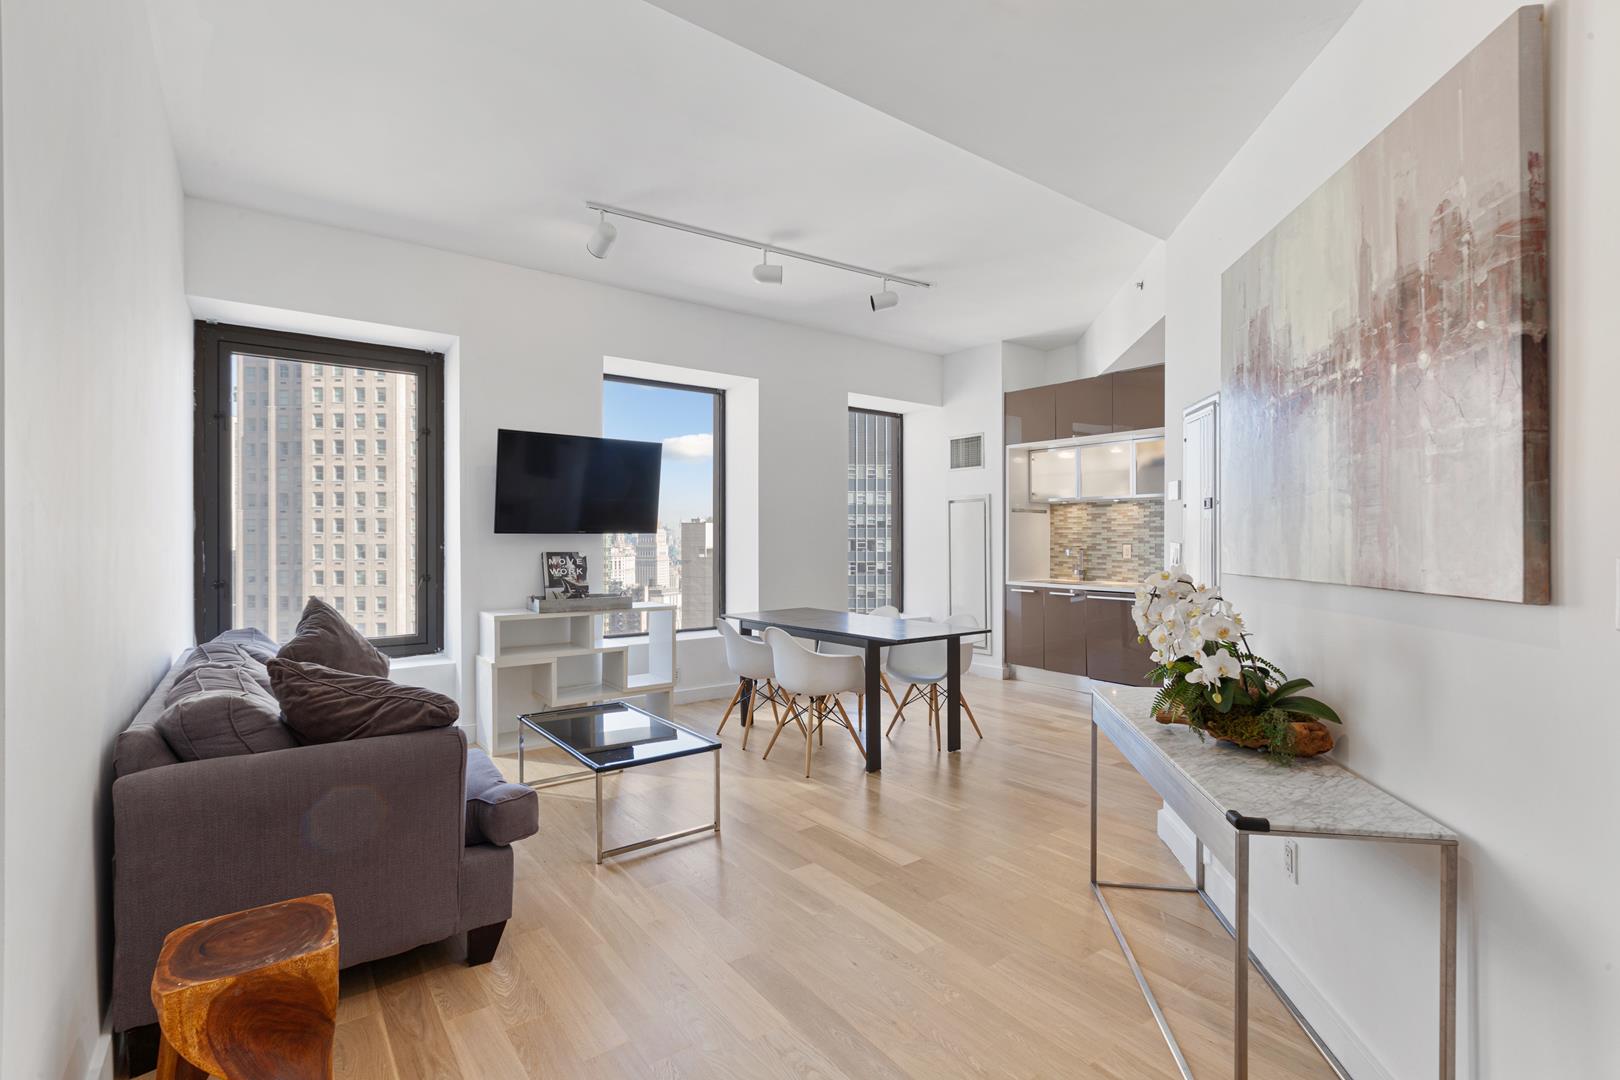 75 Wall Street 38-M, Financial District, Downtown, NYC - 2 Bedrooms  
2 Bathrooms  
4 Rooms - 